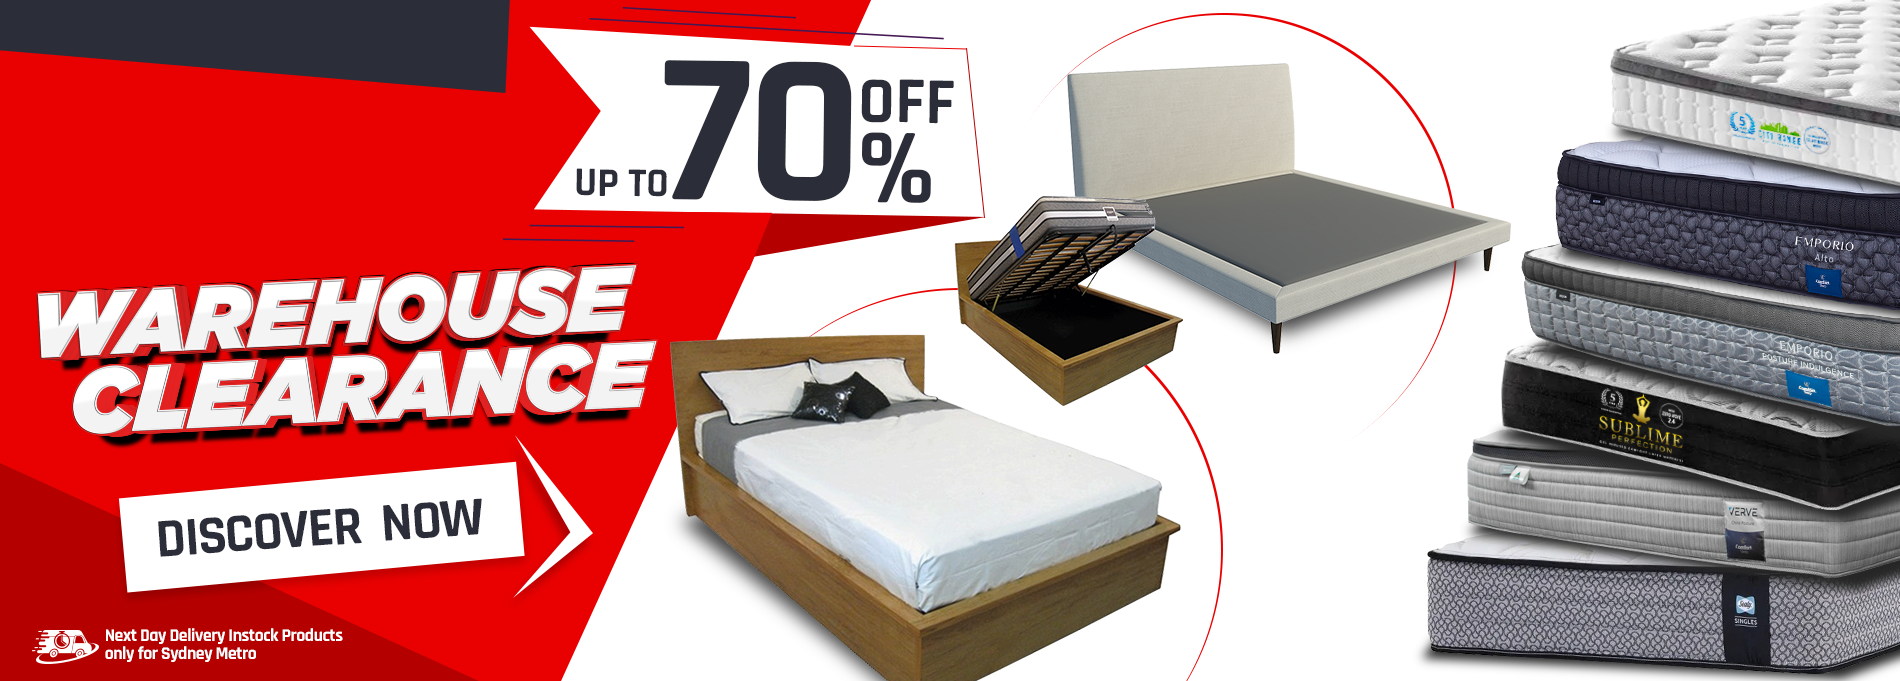 Up to 70% OFF warehouse clearance sale on mattresses, beds, bed frames & more